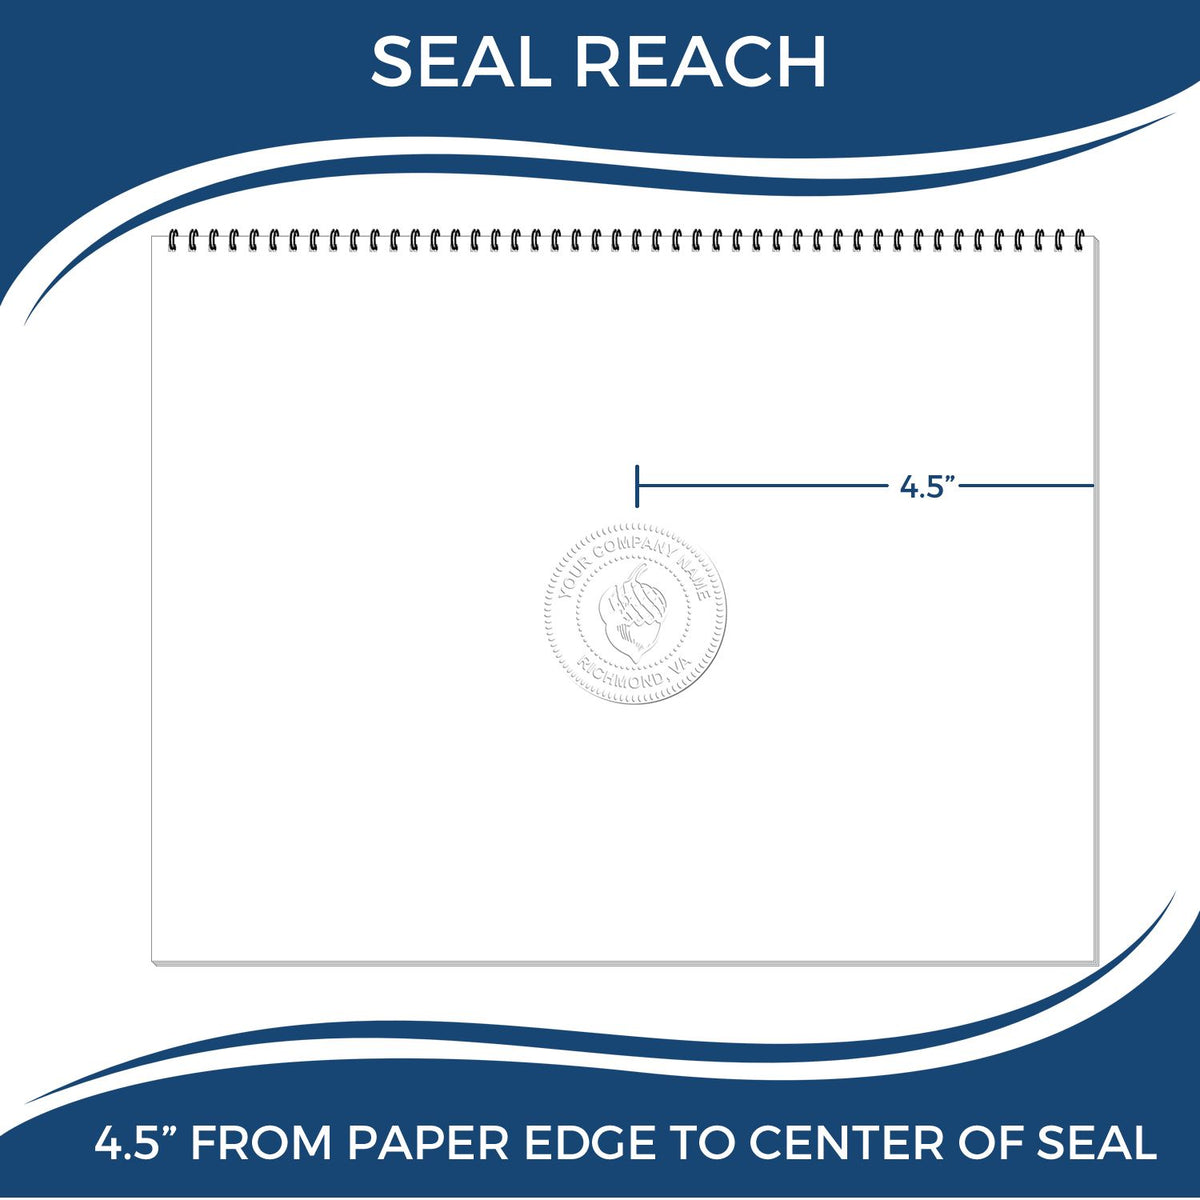 An infographic showing the seal reach which is represented by a ruler and a miniature seal image of the State of Texas Extended Long Reach Engineer Seal